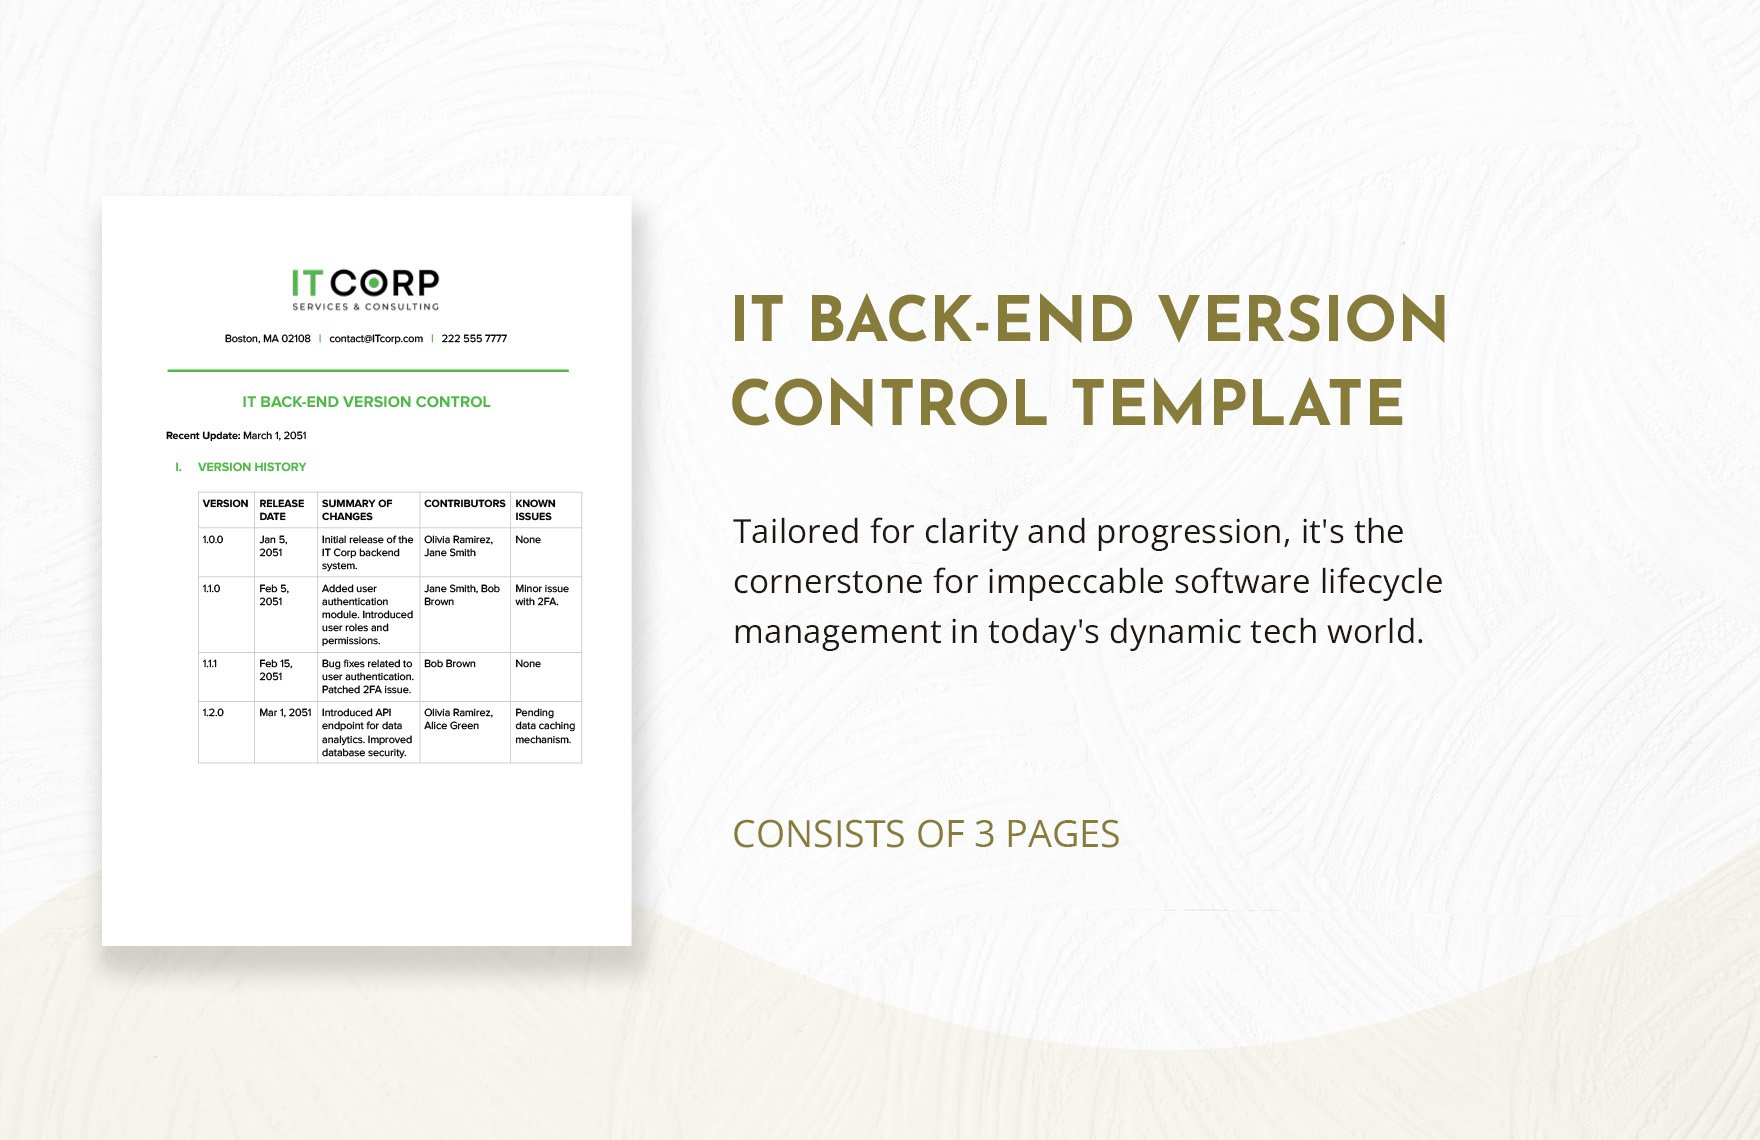 IT Back-End Version Control Template